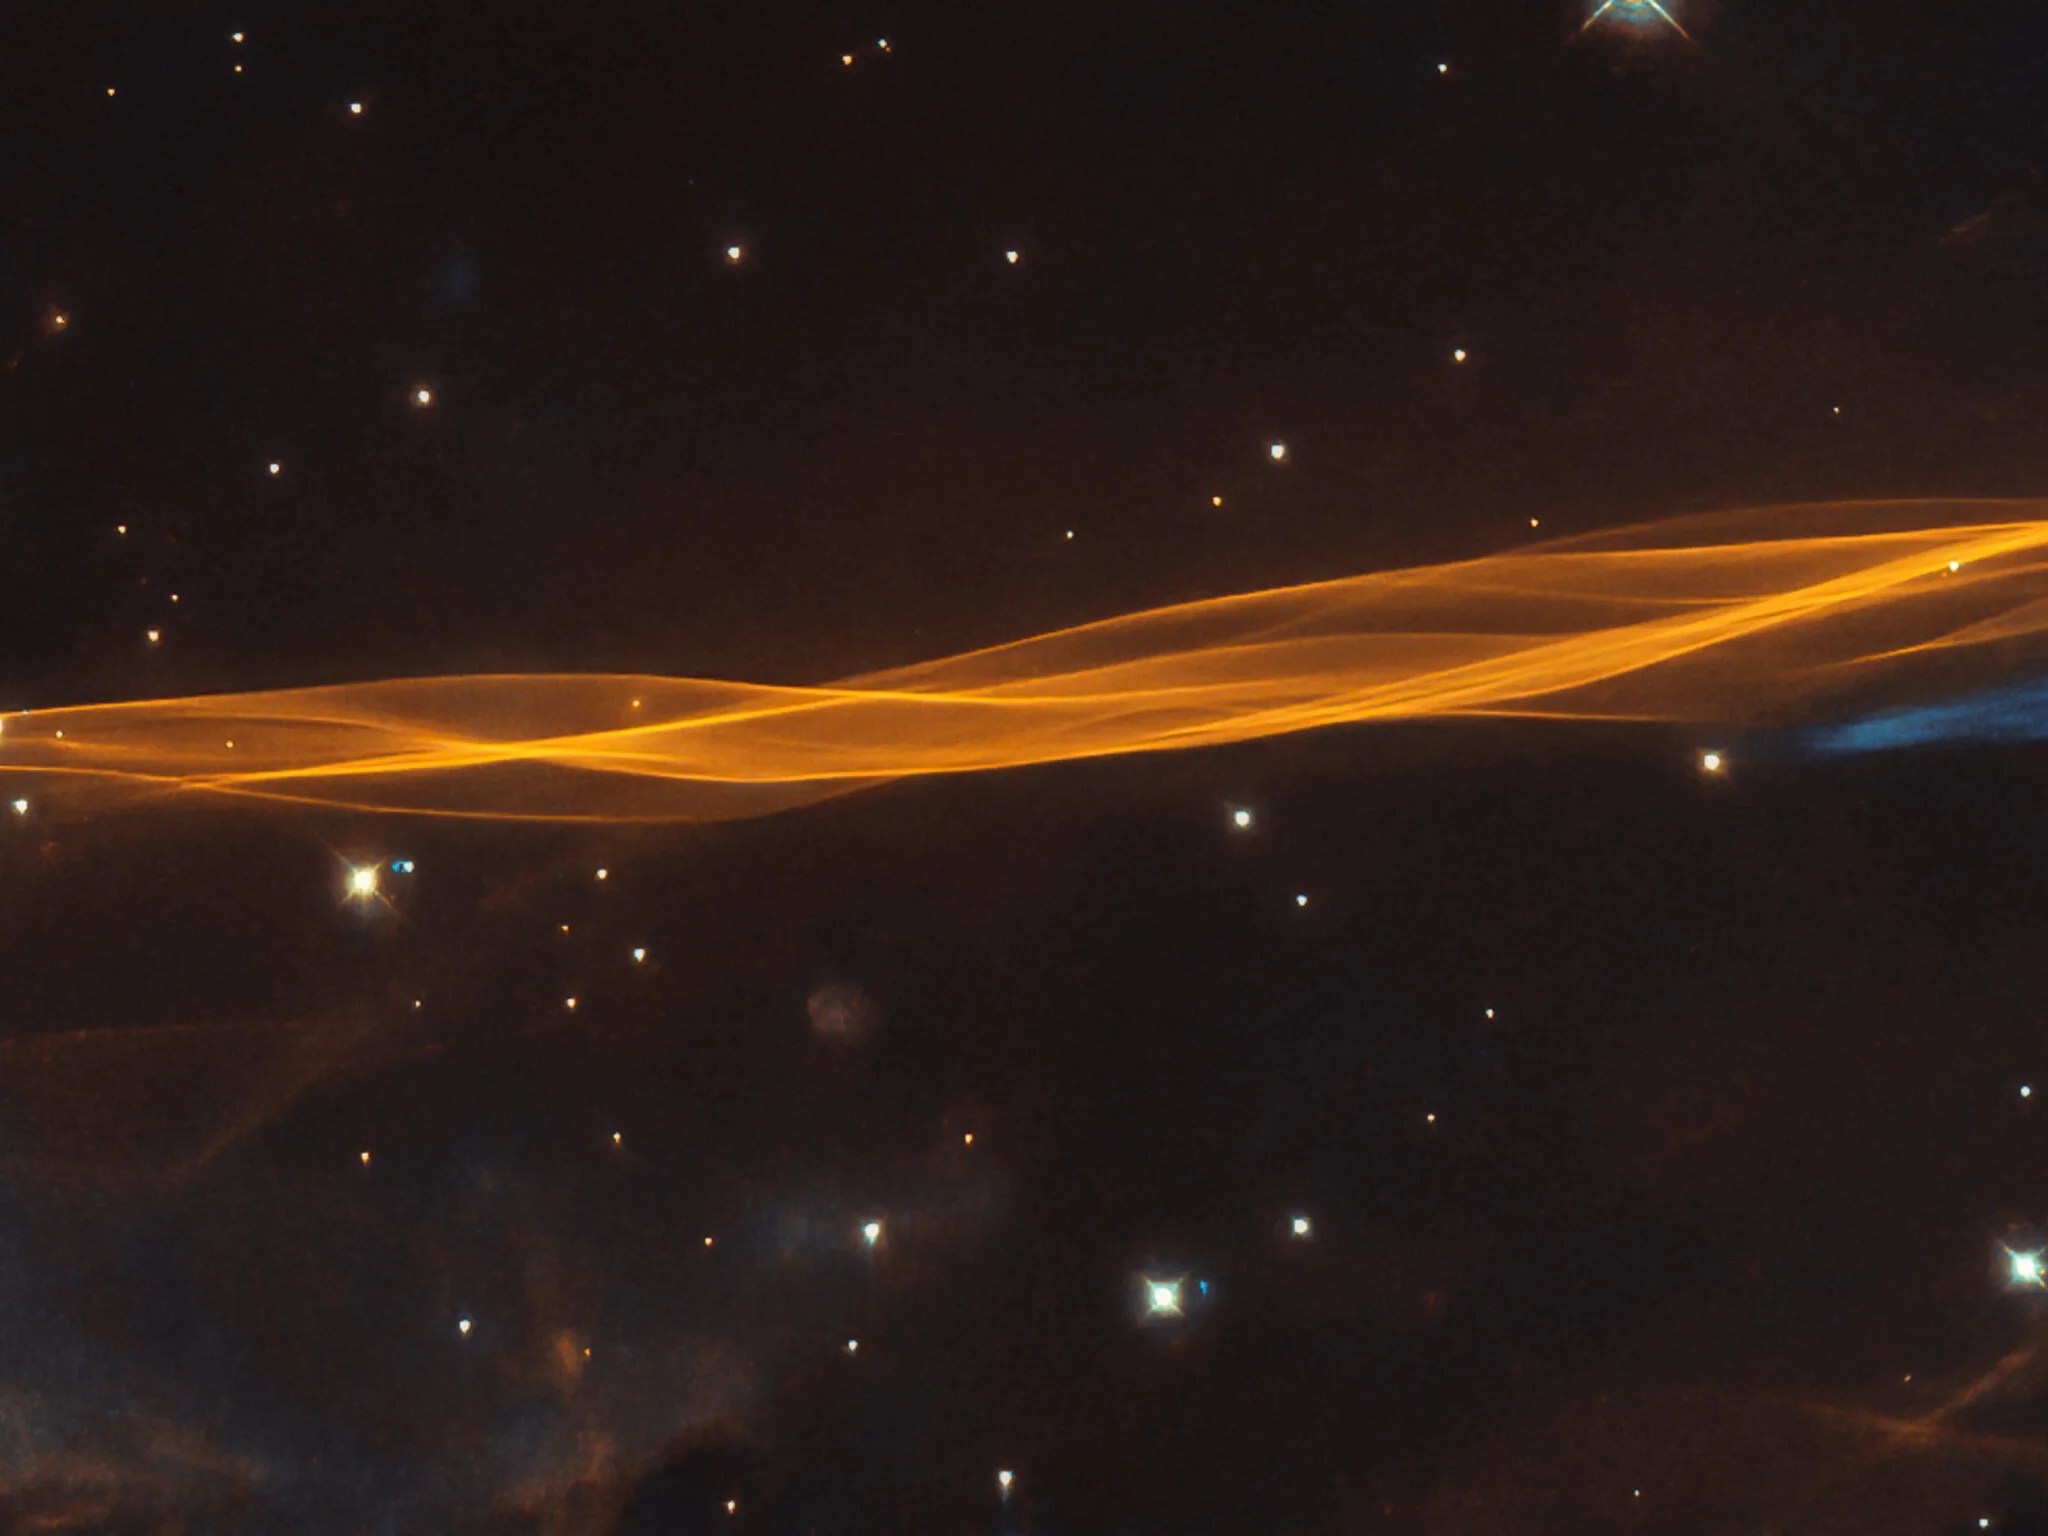 Gold-hued, veil-like strands against black backdrop of space: a small section of cygnus supernova blast wave as seen by hubble